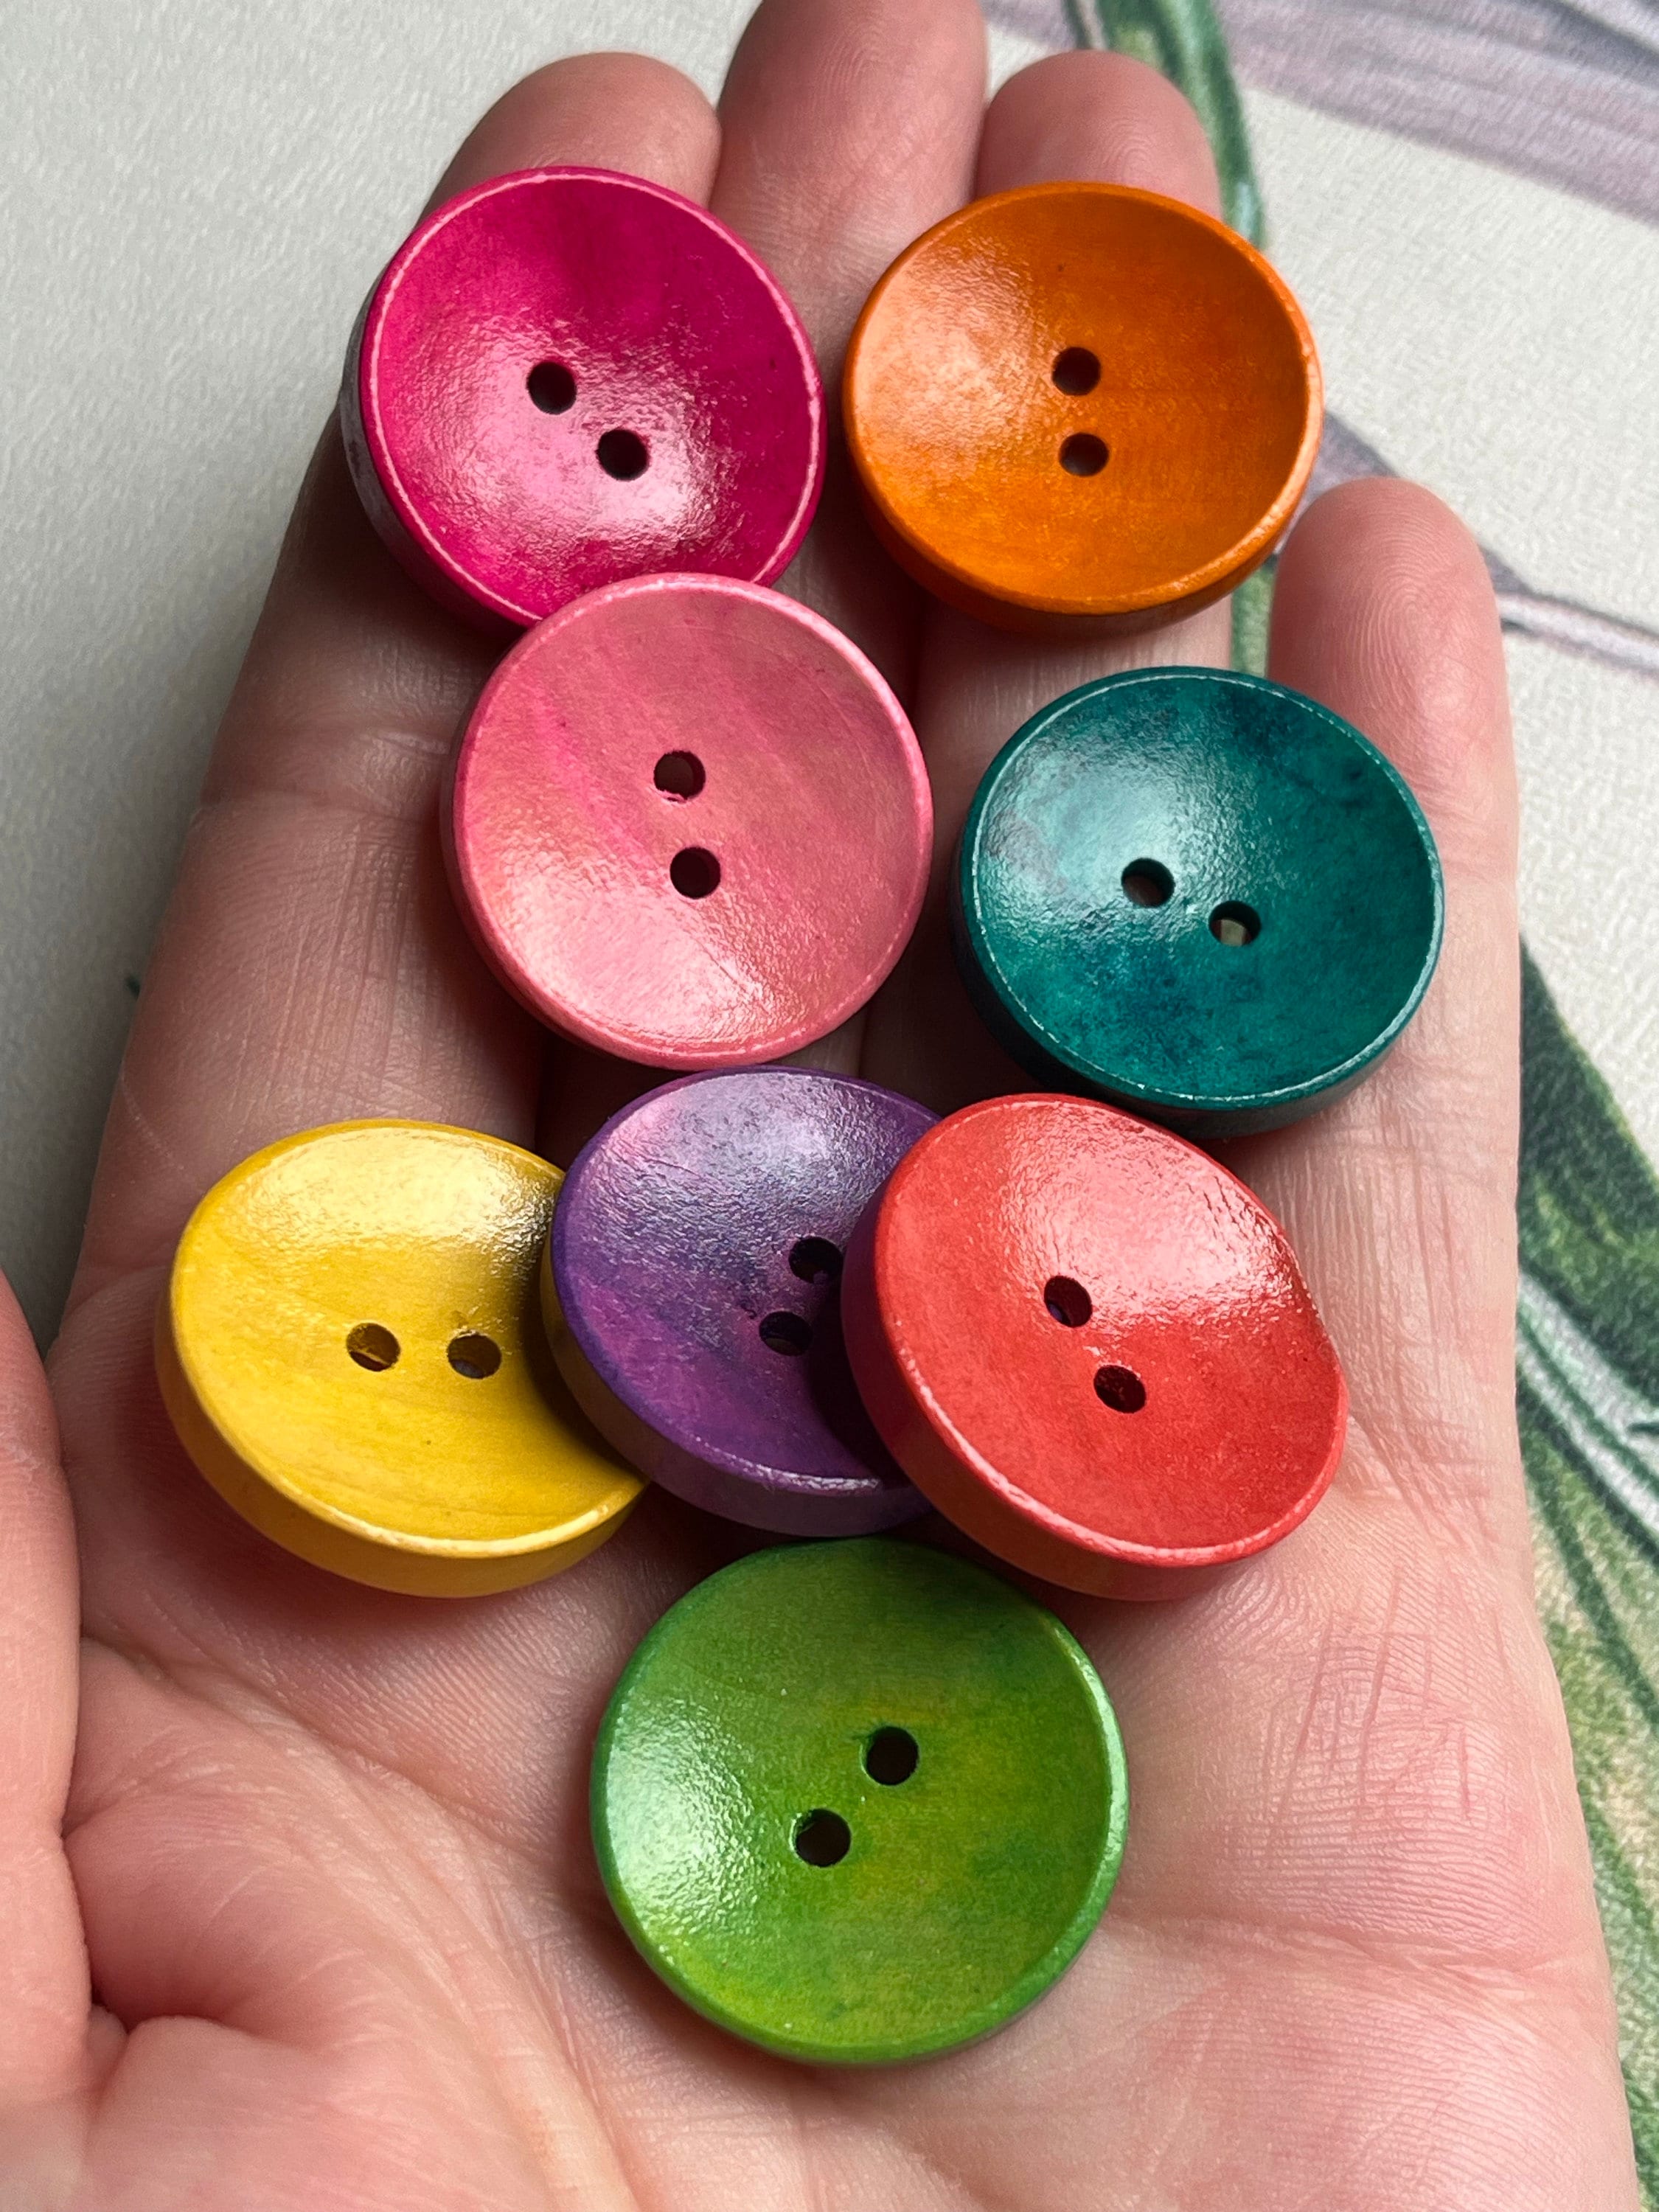 Wooden Buttons - Round Wood Buttons for Crafts Sewing Sweater by Mandala  Crafts, Natural Color Bulk 30 PCs 30mm 1.25 Inch Button with 4 Holes